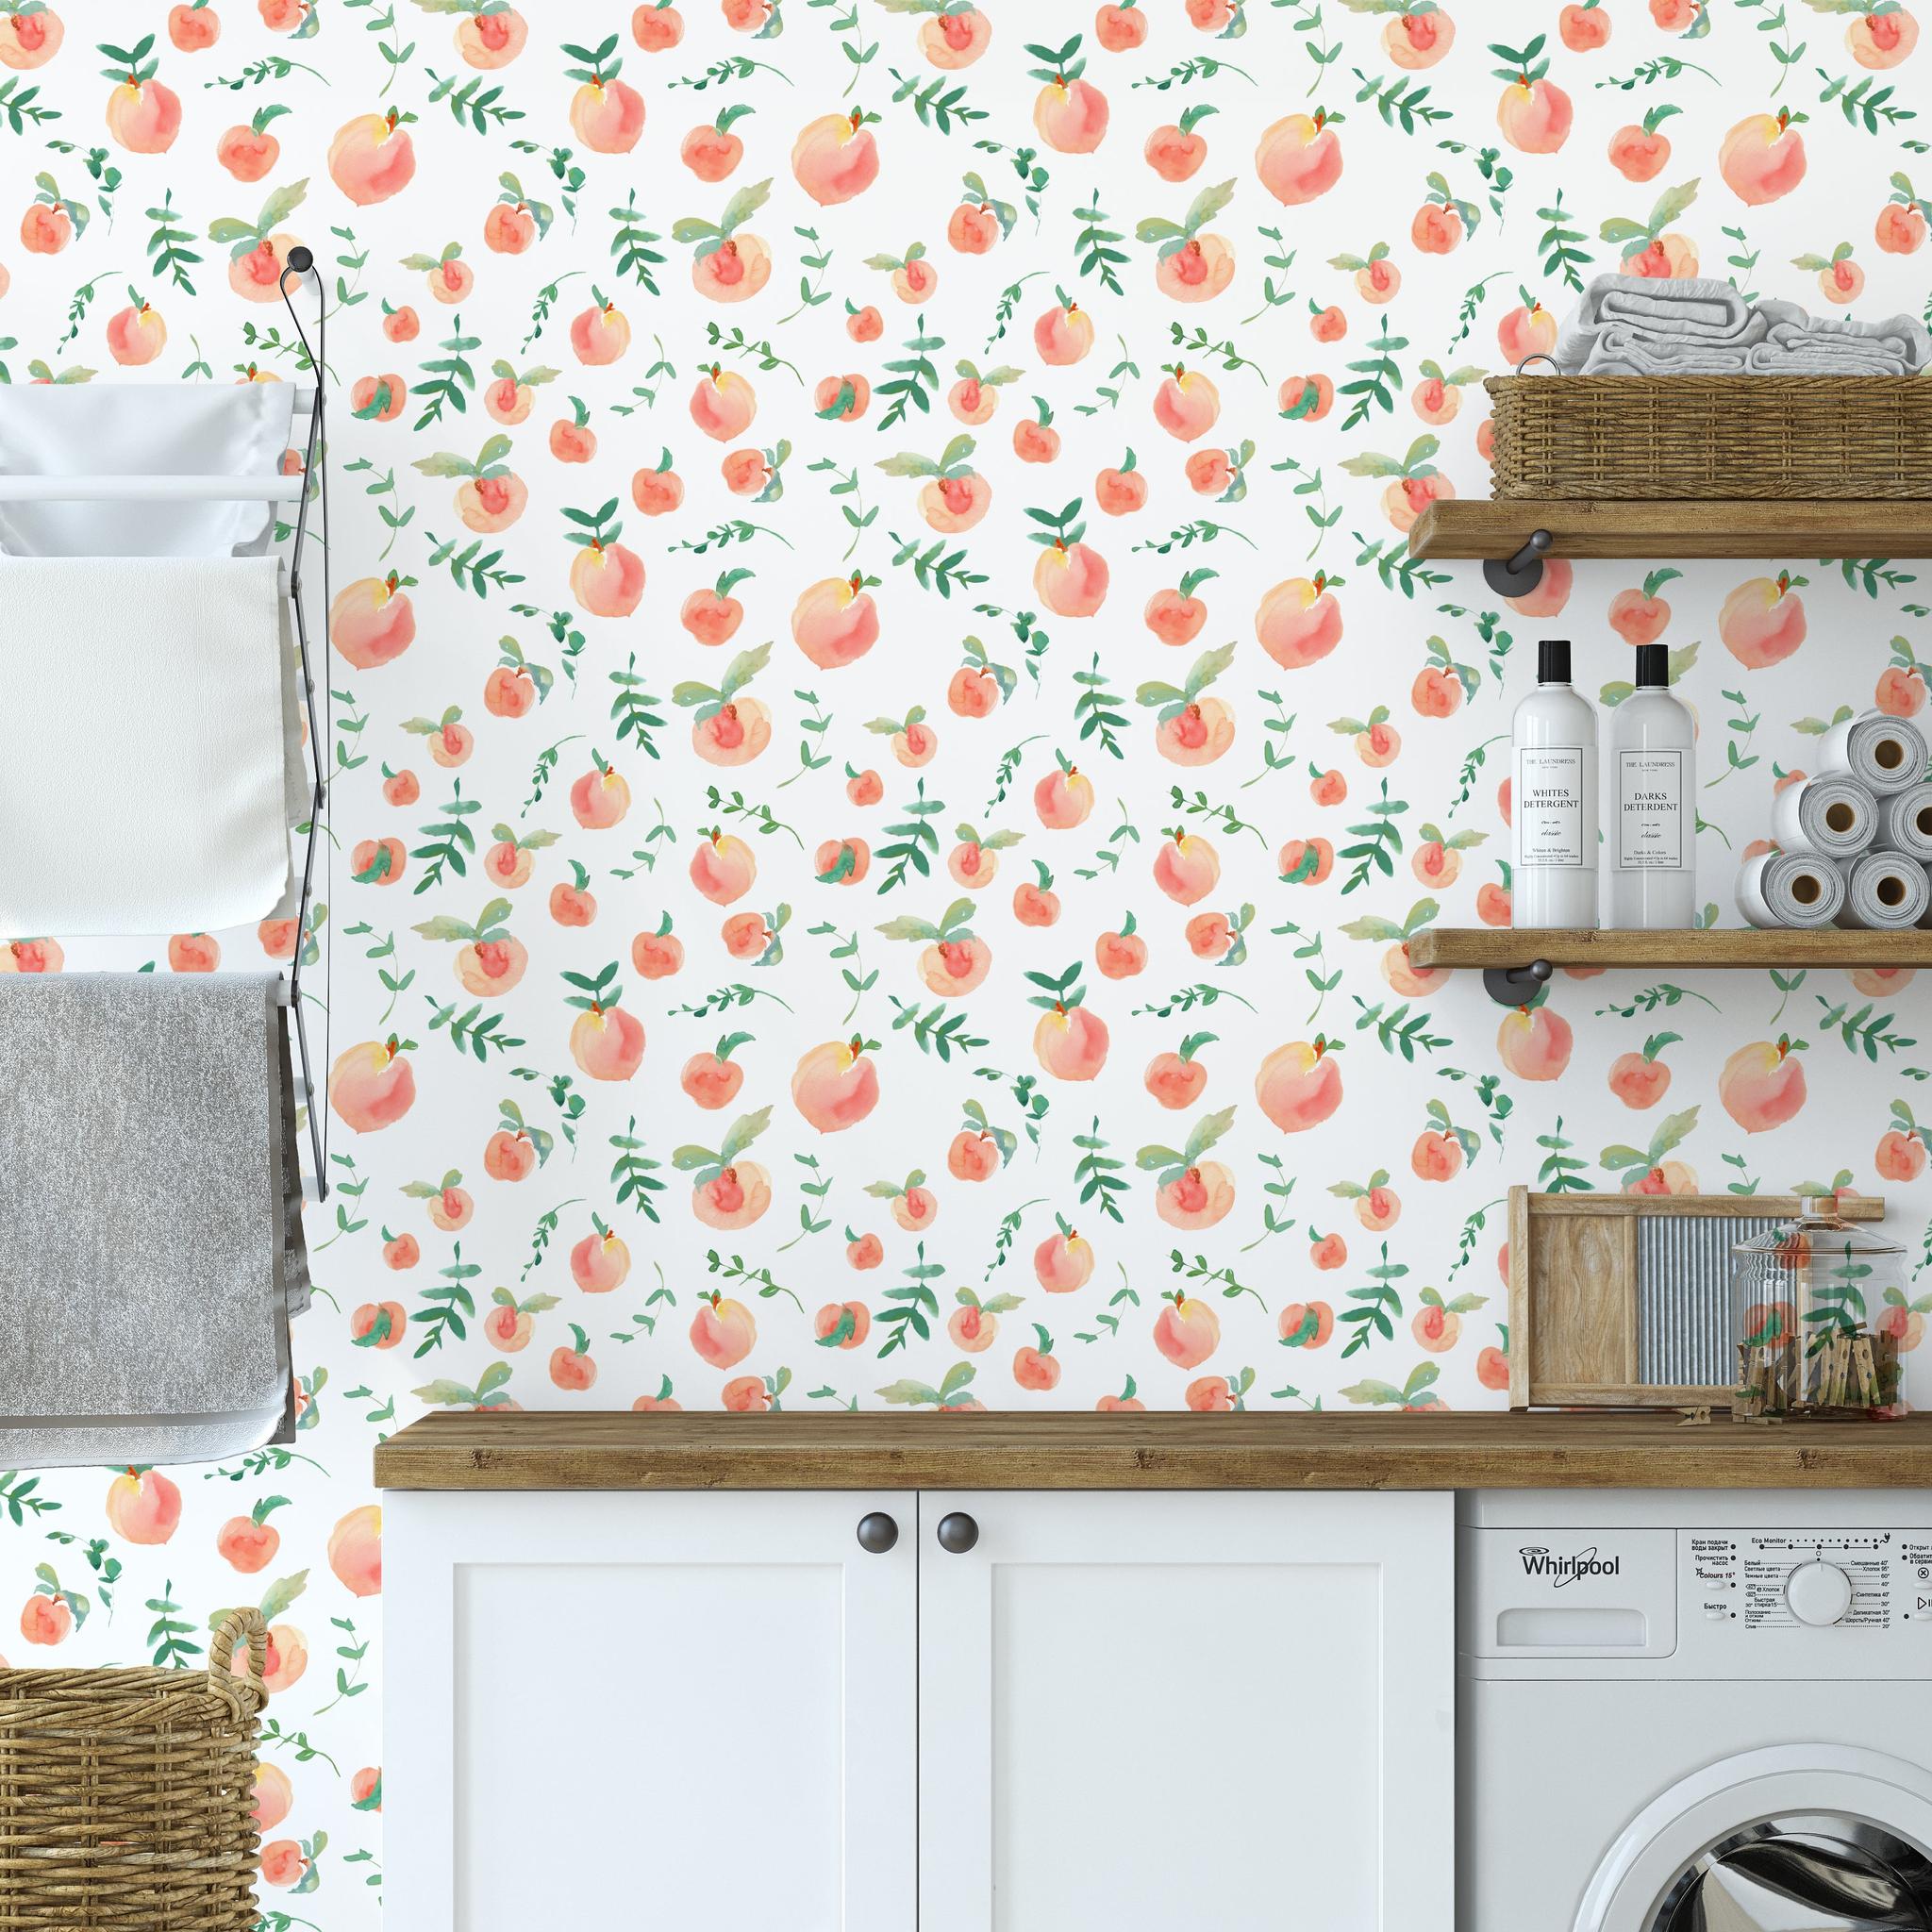 "Peachy Clean Wallpaper by Wall Blush featured in stylish laundry room, highlighting playful peach pattern design."